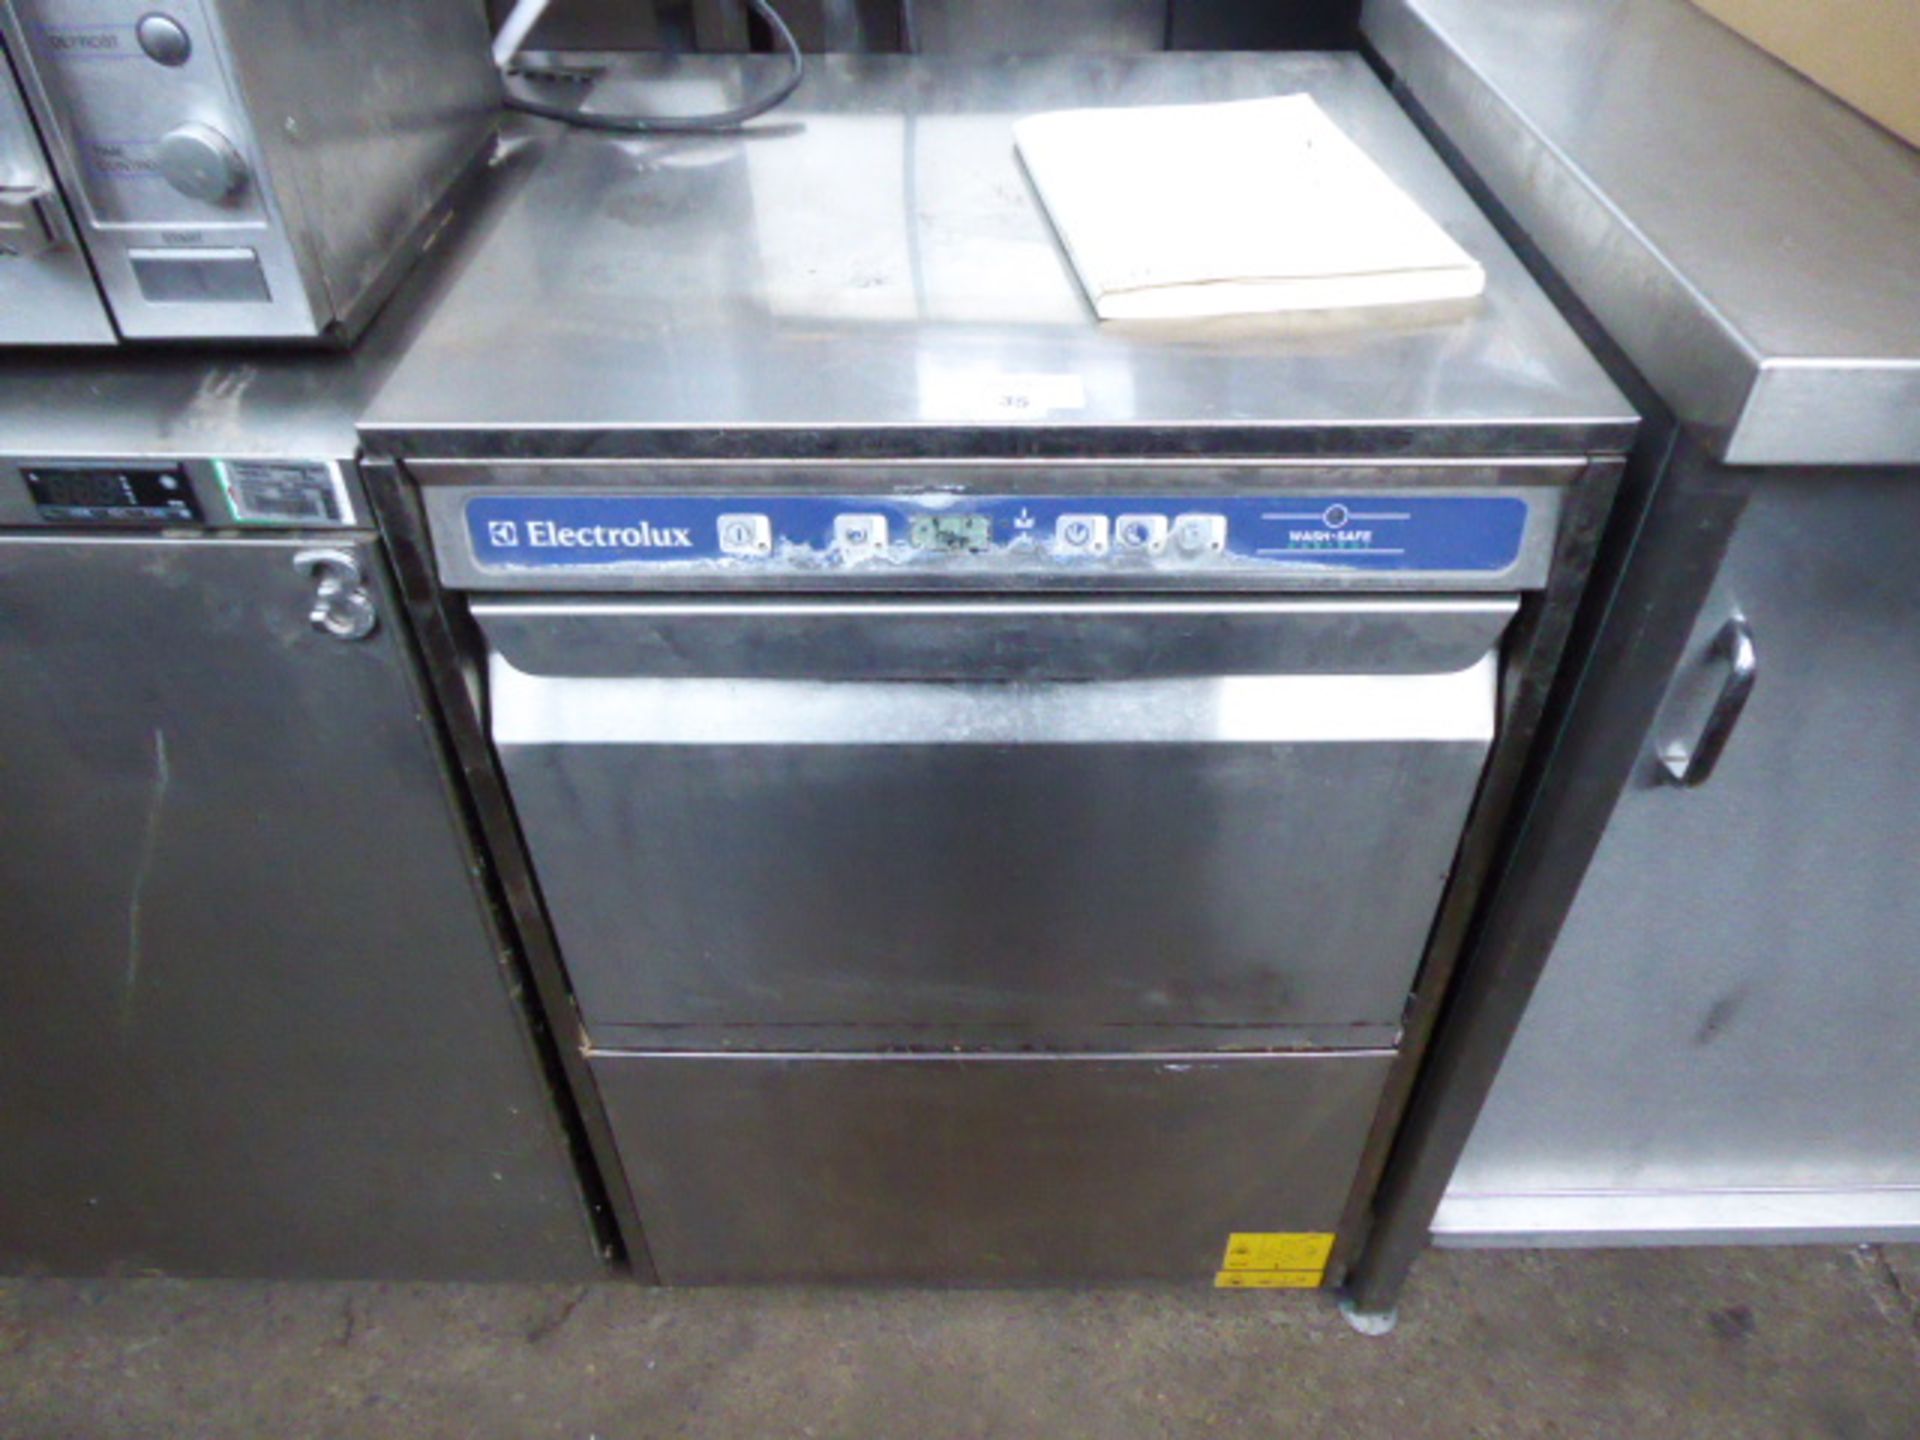 60cm Electrolux wash safe under counter drop front dish washer